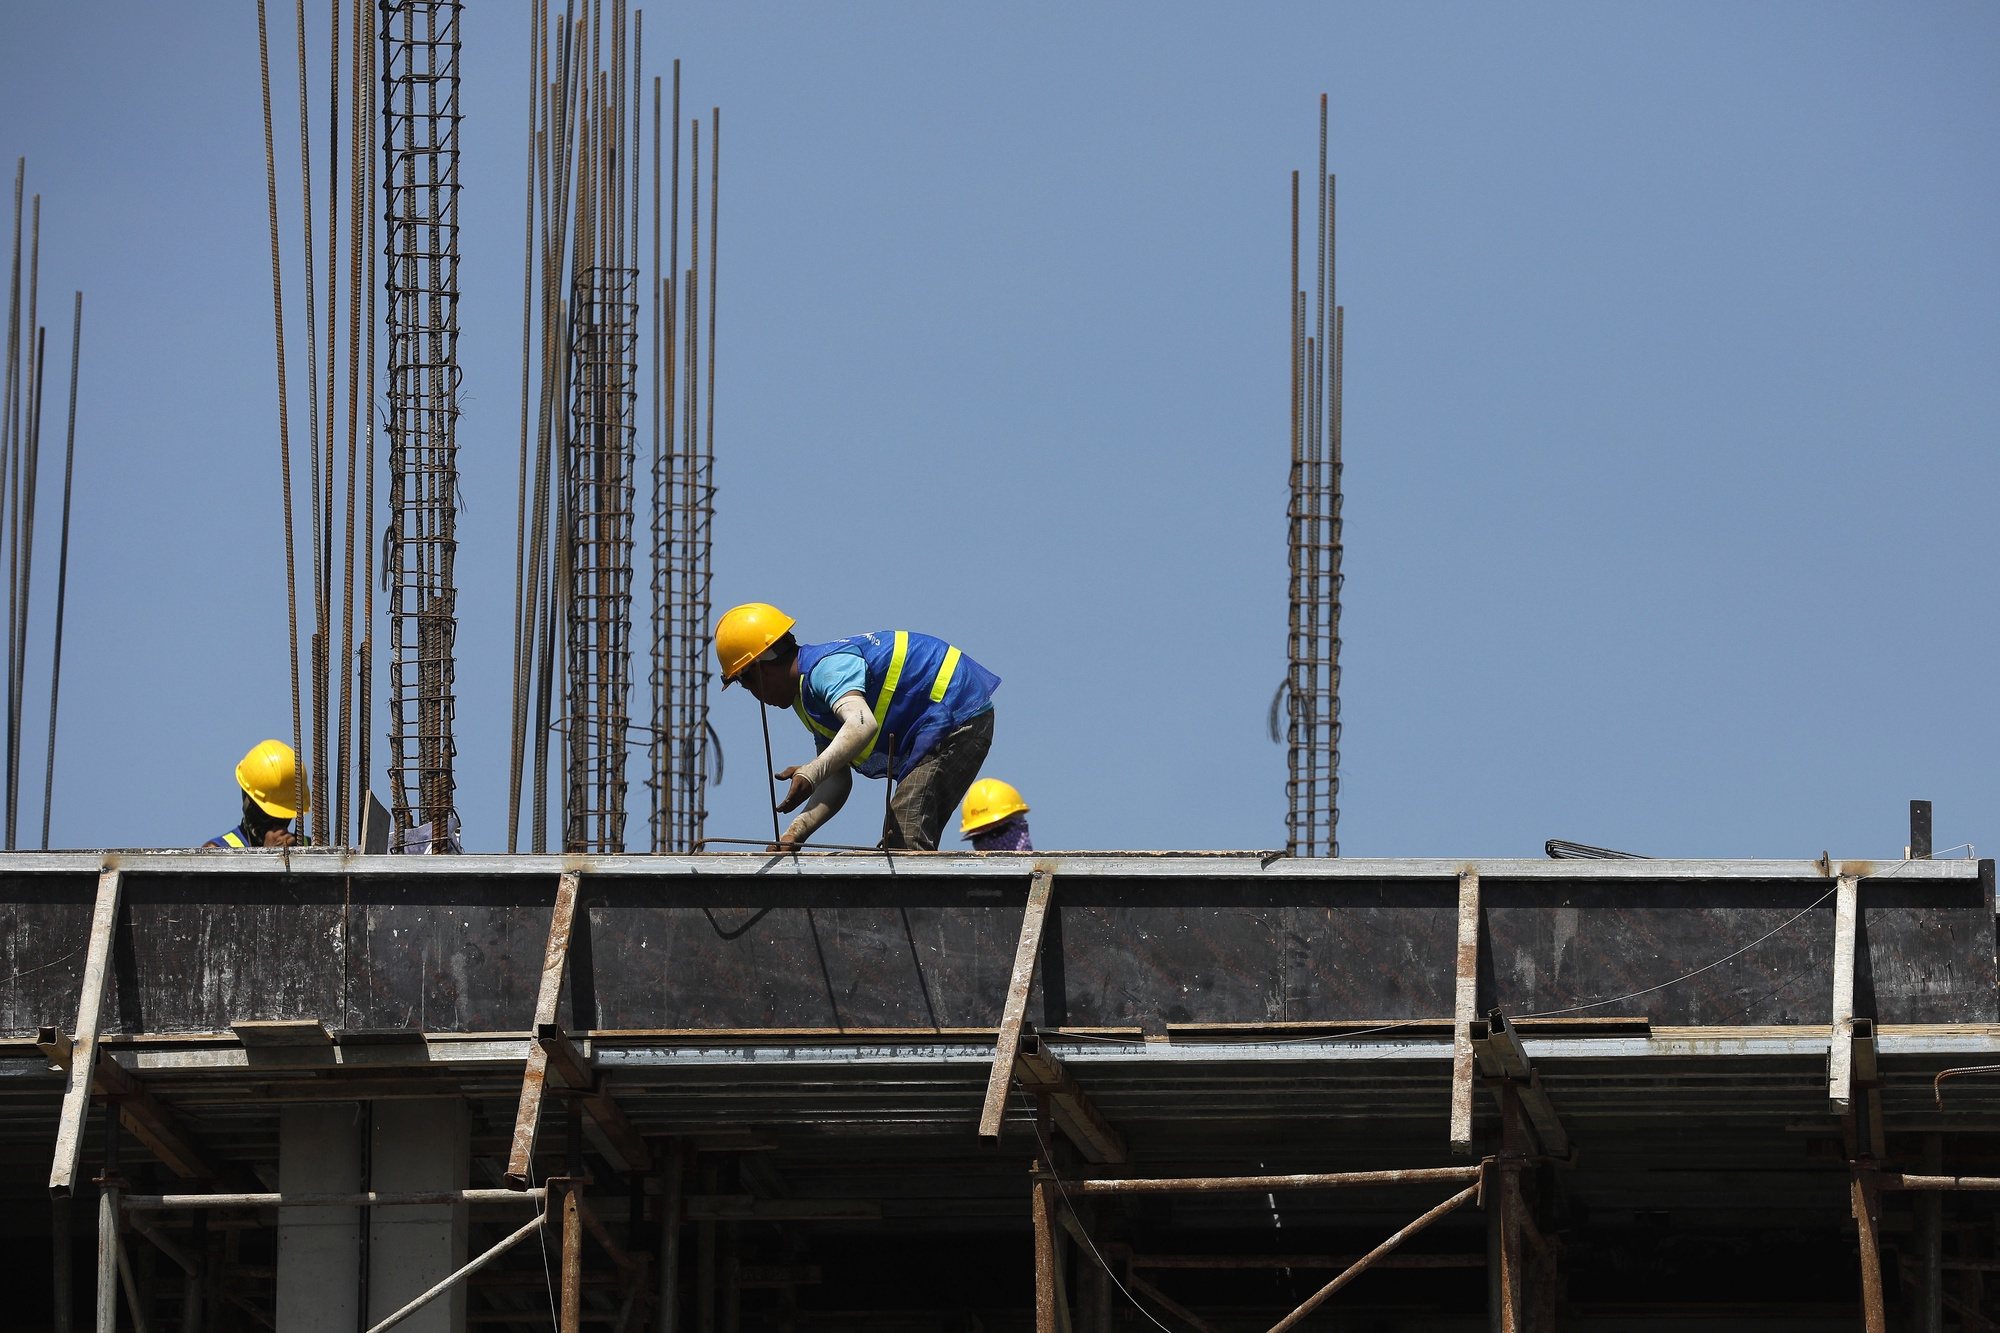 epa08534648 Laborers work at a construction site in Hanoi, Vietnam, 08 July 2020. Vietnam&#039;s GDP growth grew by 1.8 percent in the first half of 2020 due to the pandemic of the COVID-19 disease caused by the SARS-CoV-2 coronavirus, according to General Statistics Office (GSO).  EPA/LUONG THAI LINH